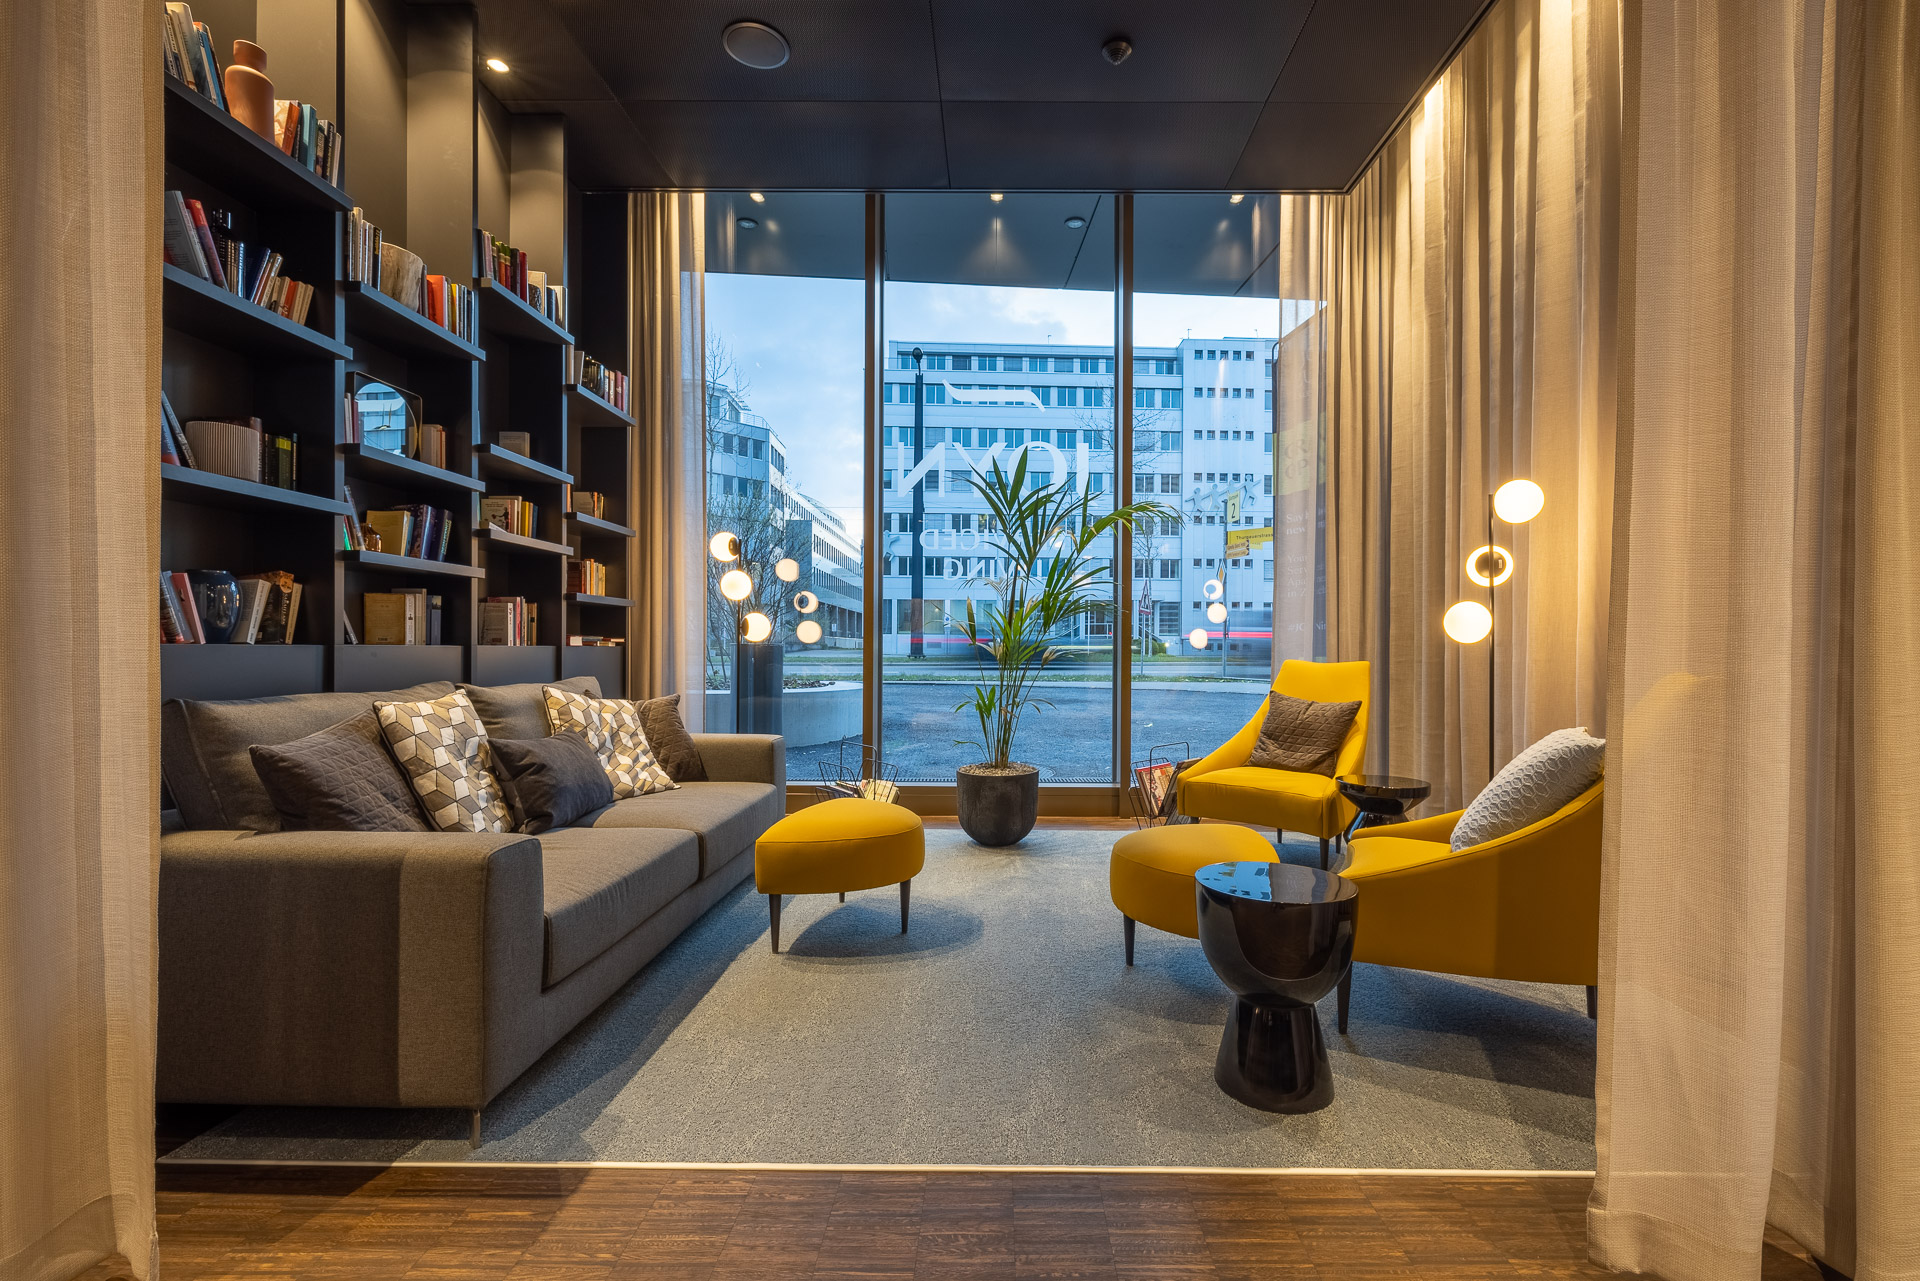 A view of the modern lobby with comfortable seating and a large bookshelf at JOYN Zurich.